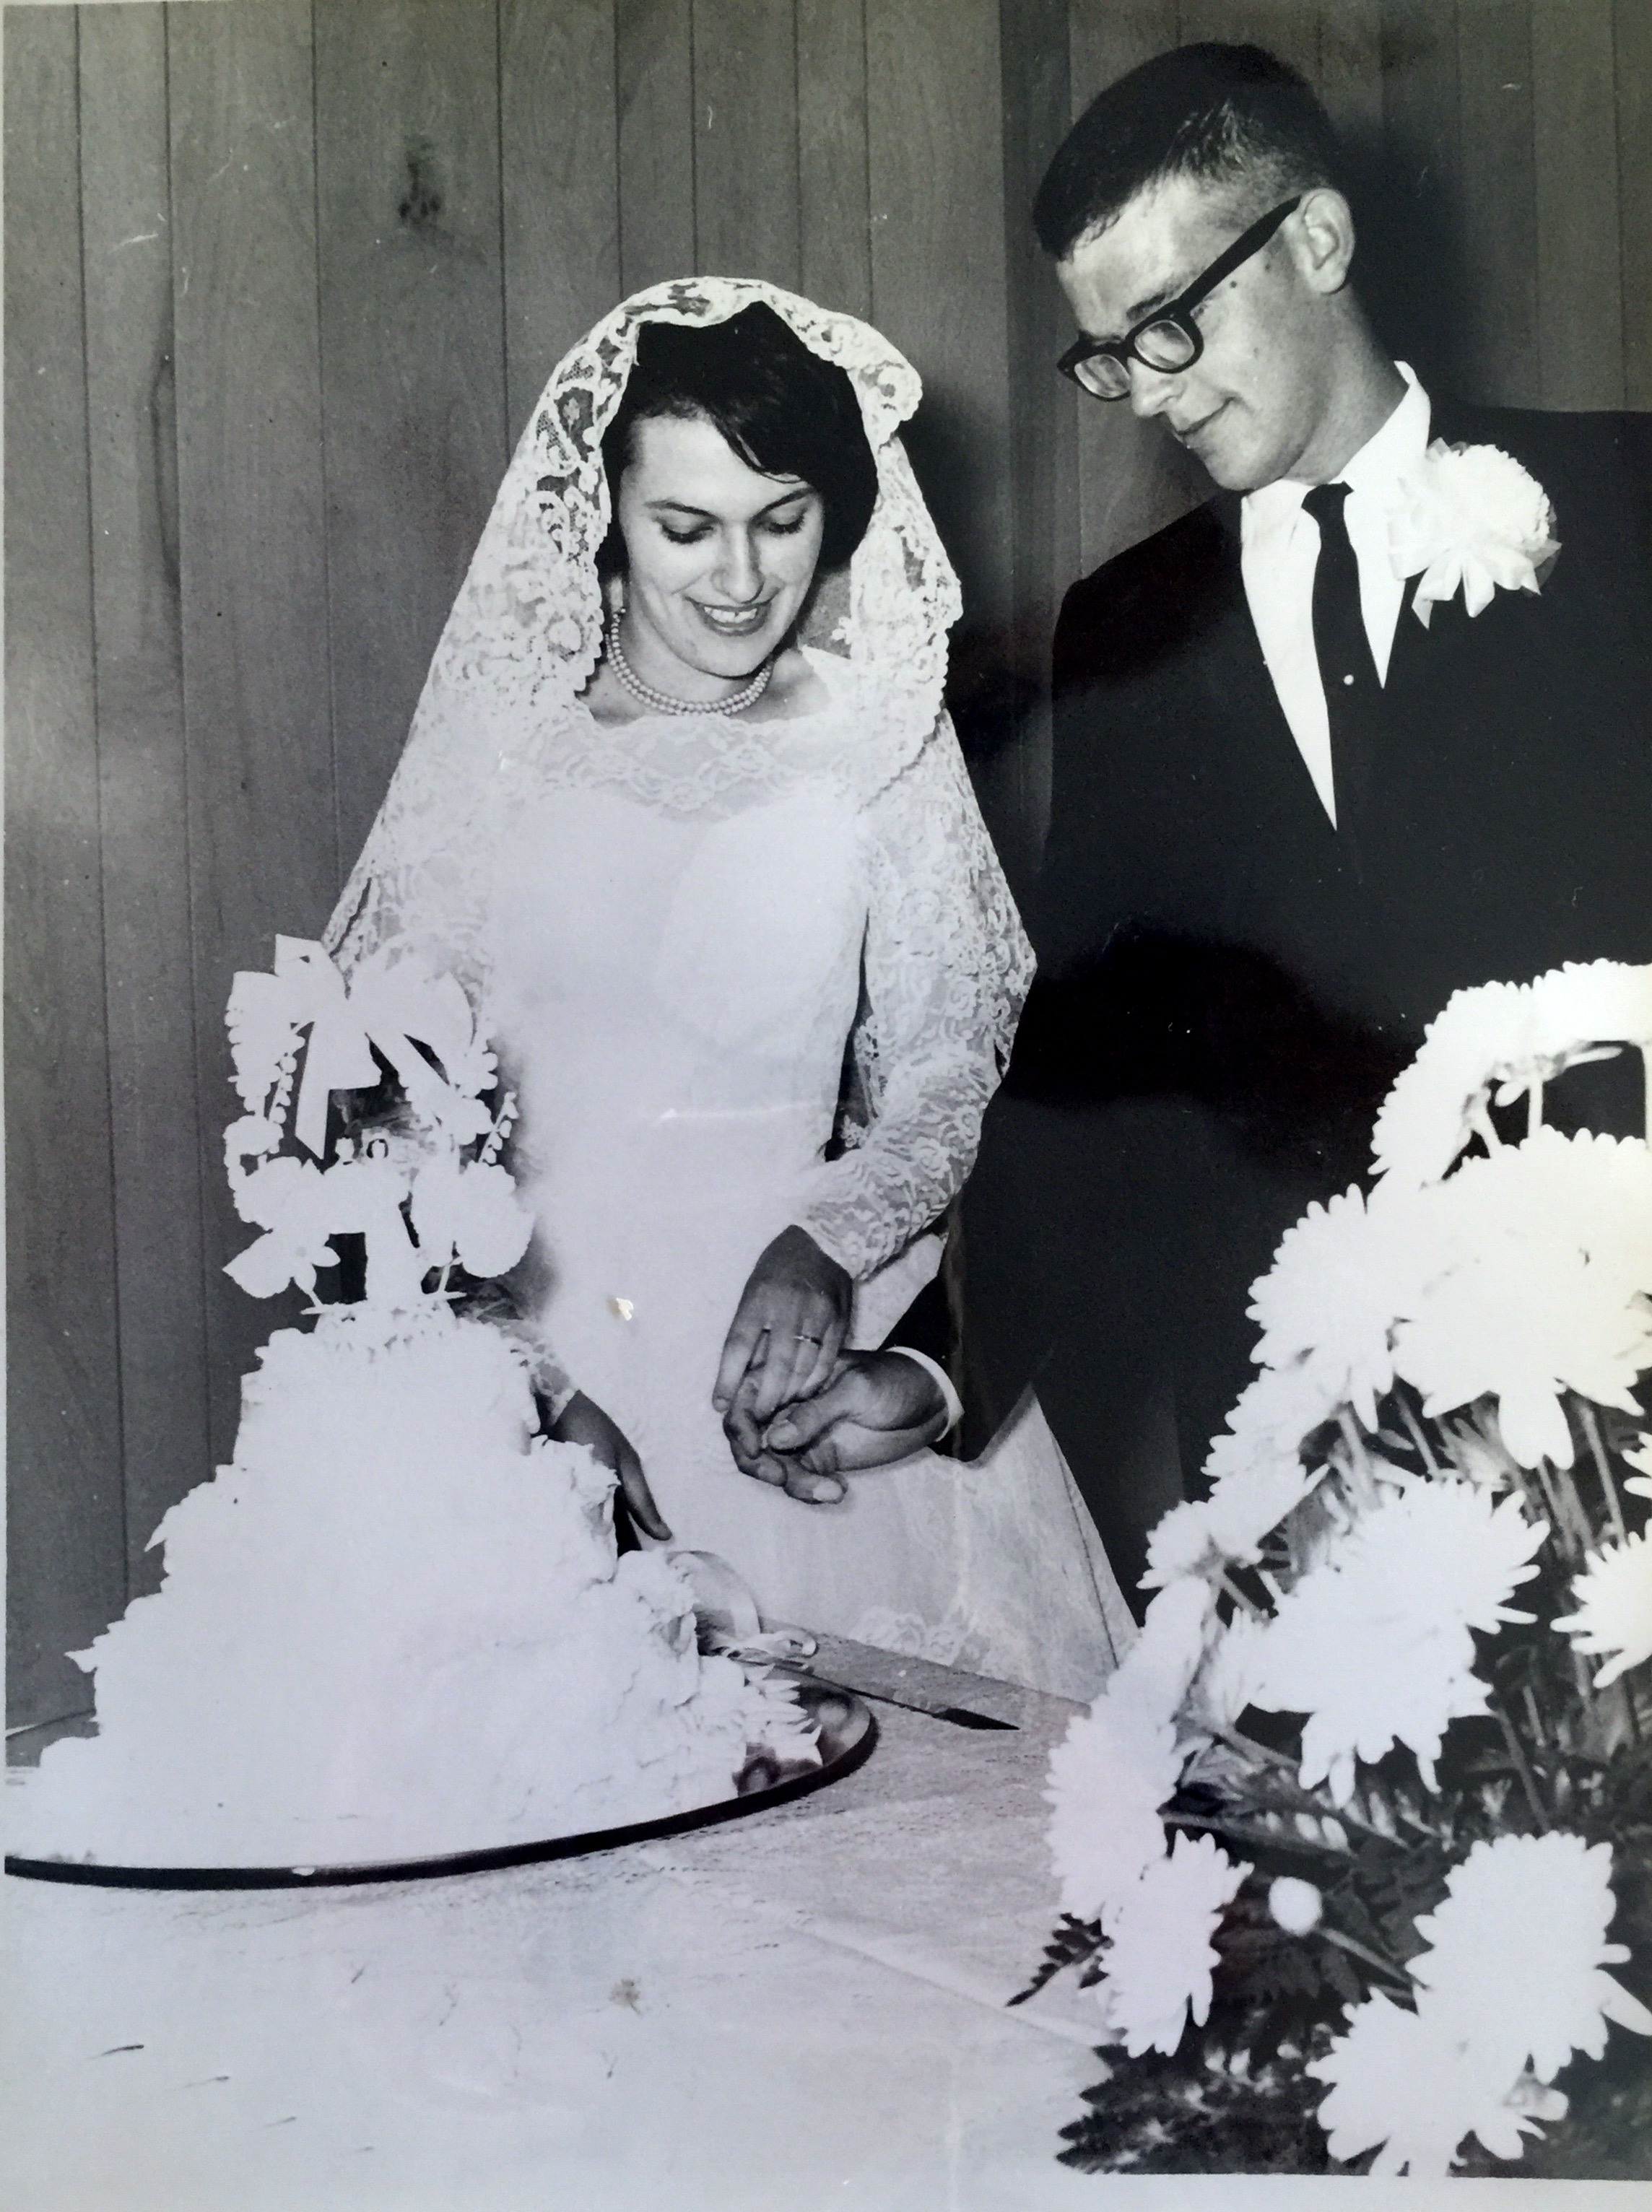 We were married June 1966 and will celebrate our 50th anniversary on the 26th. 